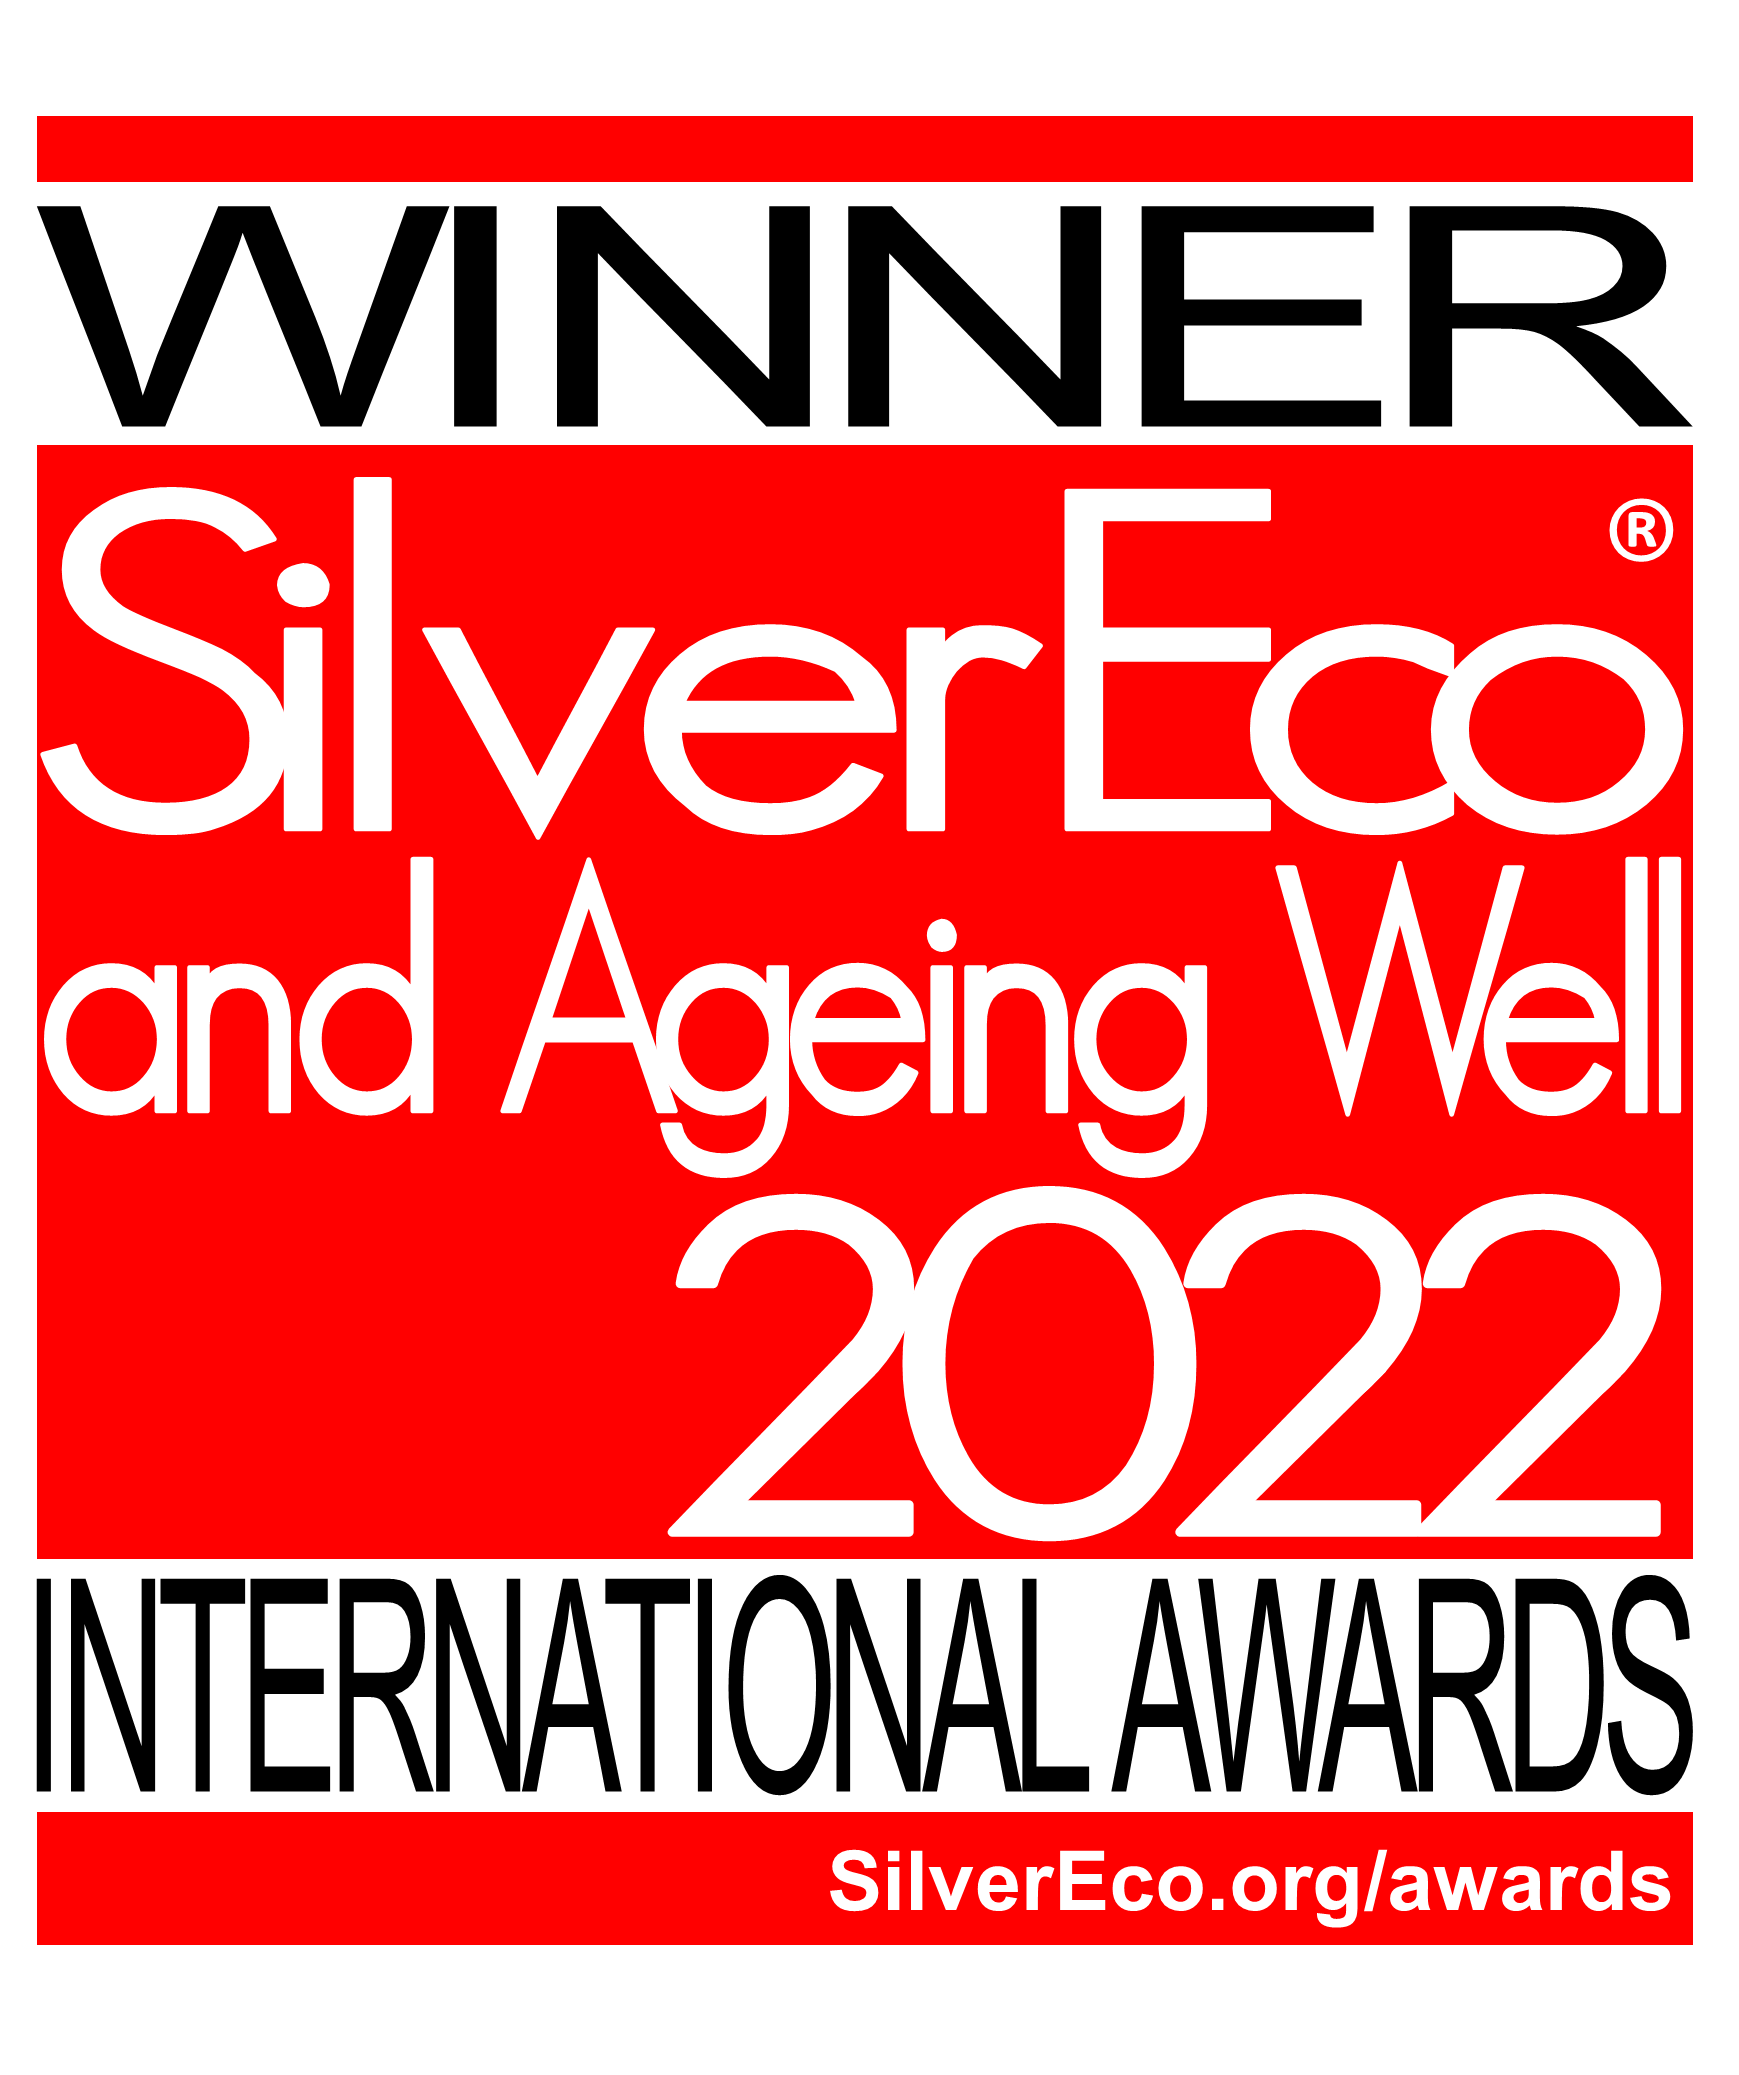 SilverEco & Ageing Well International Awards 2022